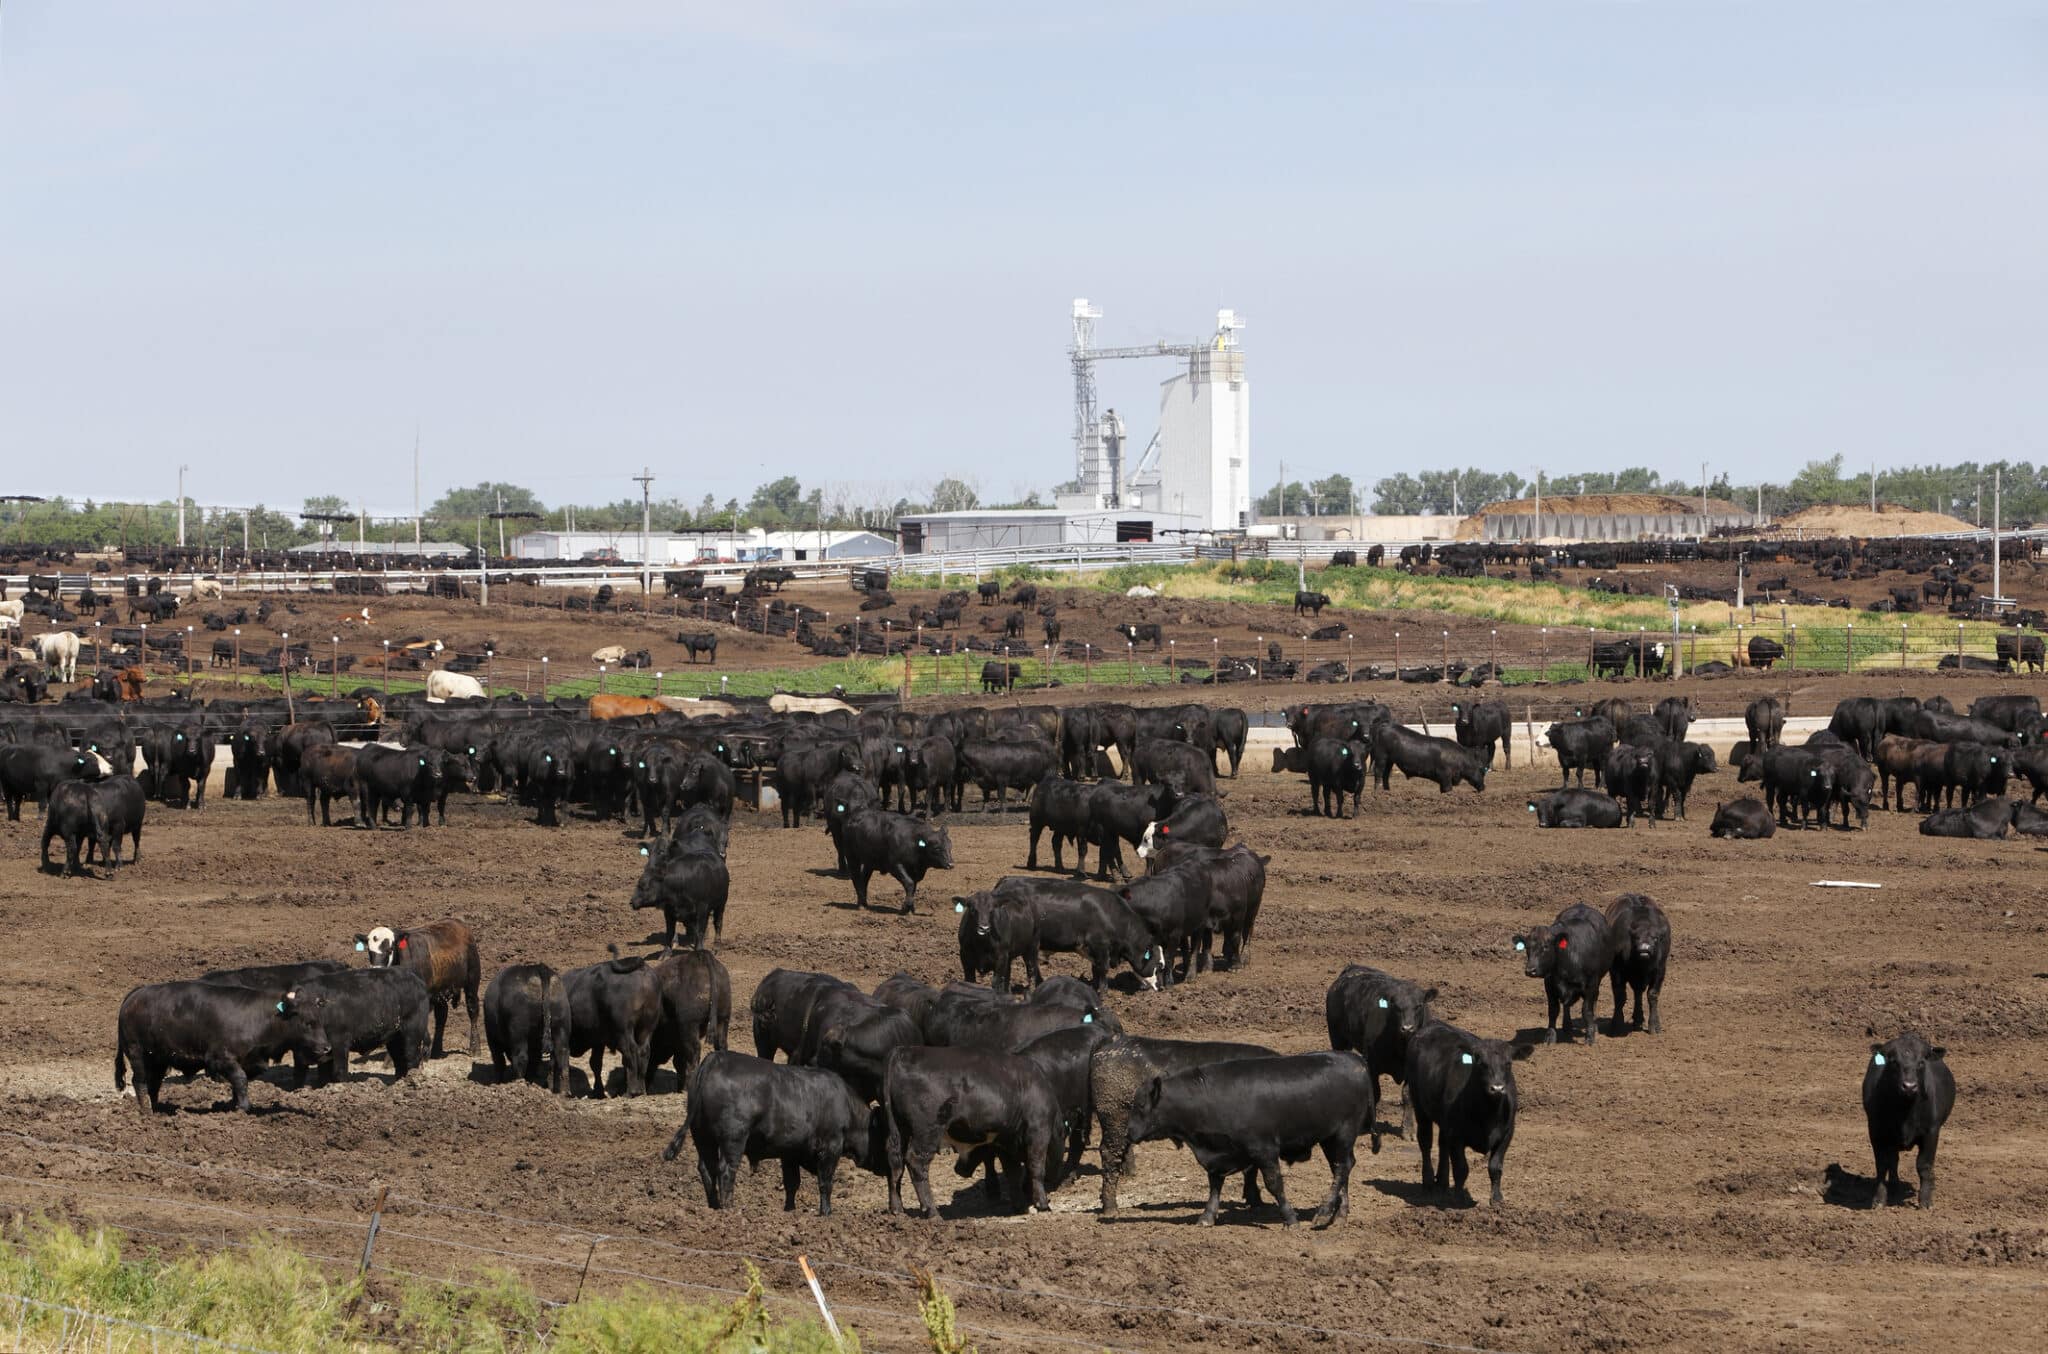 2,000+ Cattle Killed By Heat Wave Were Buried, Dumped at Kansas Landfill